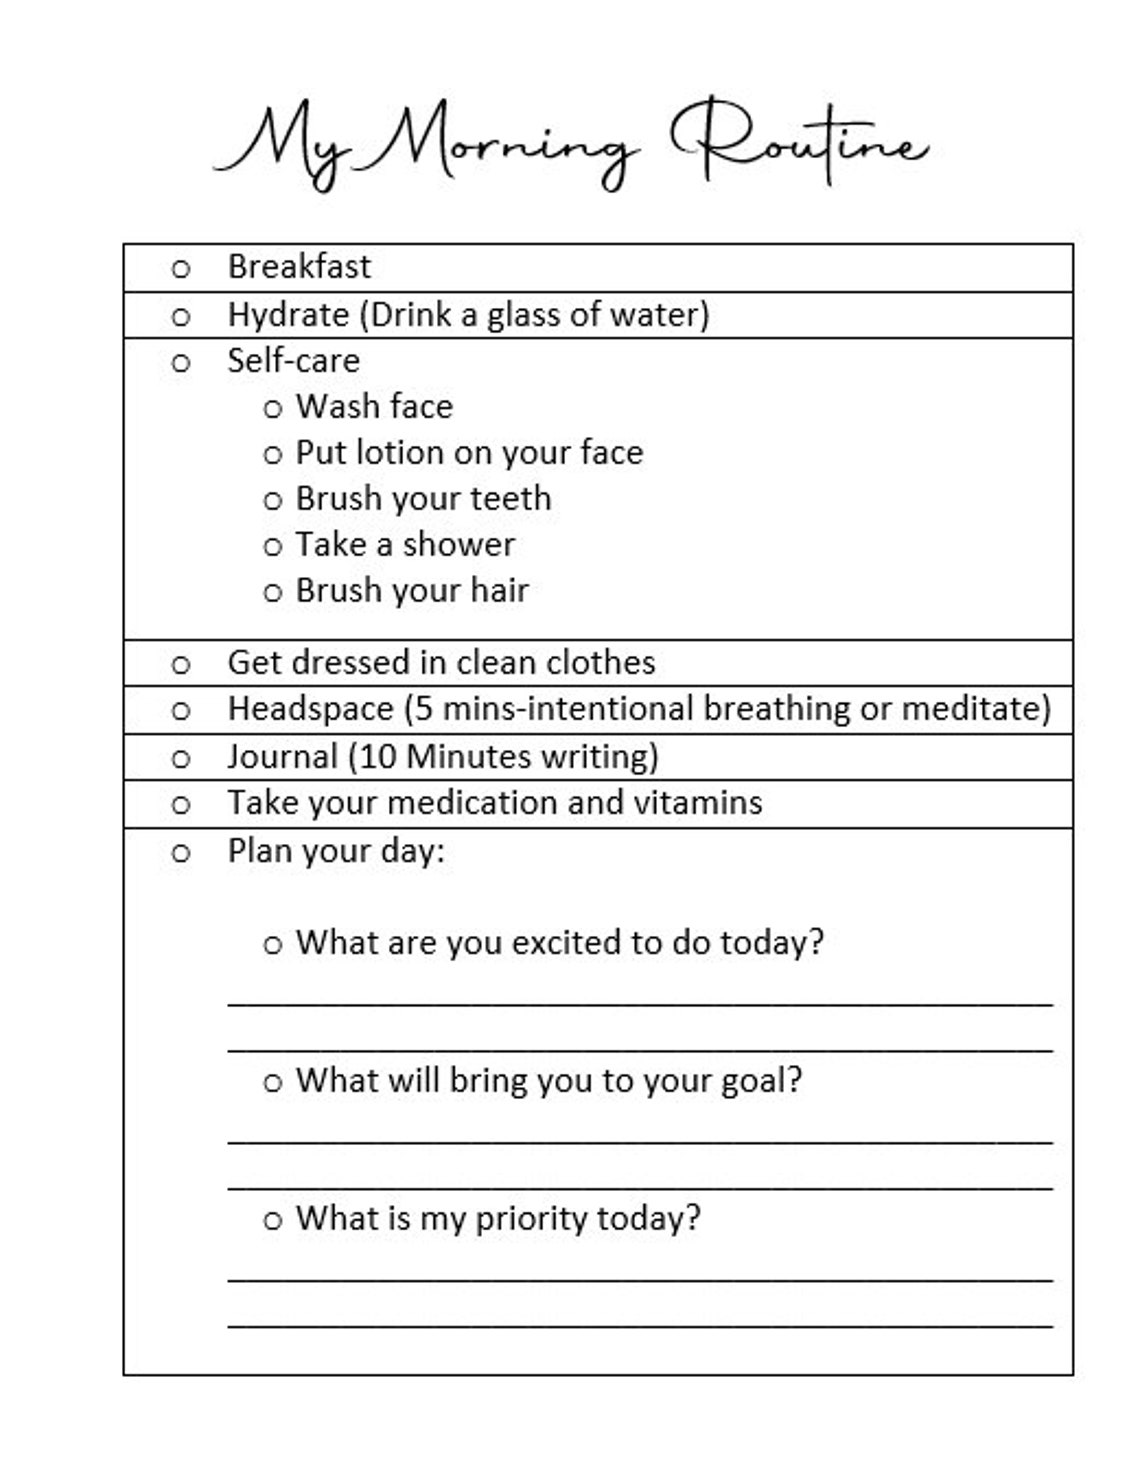 mental-health-journal-instant-printable-download-anxiety-depression